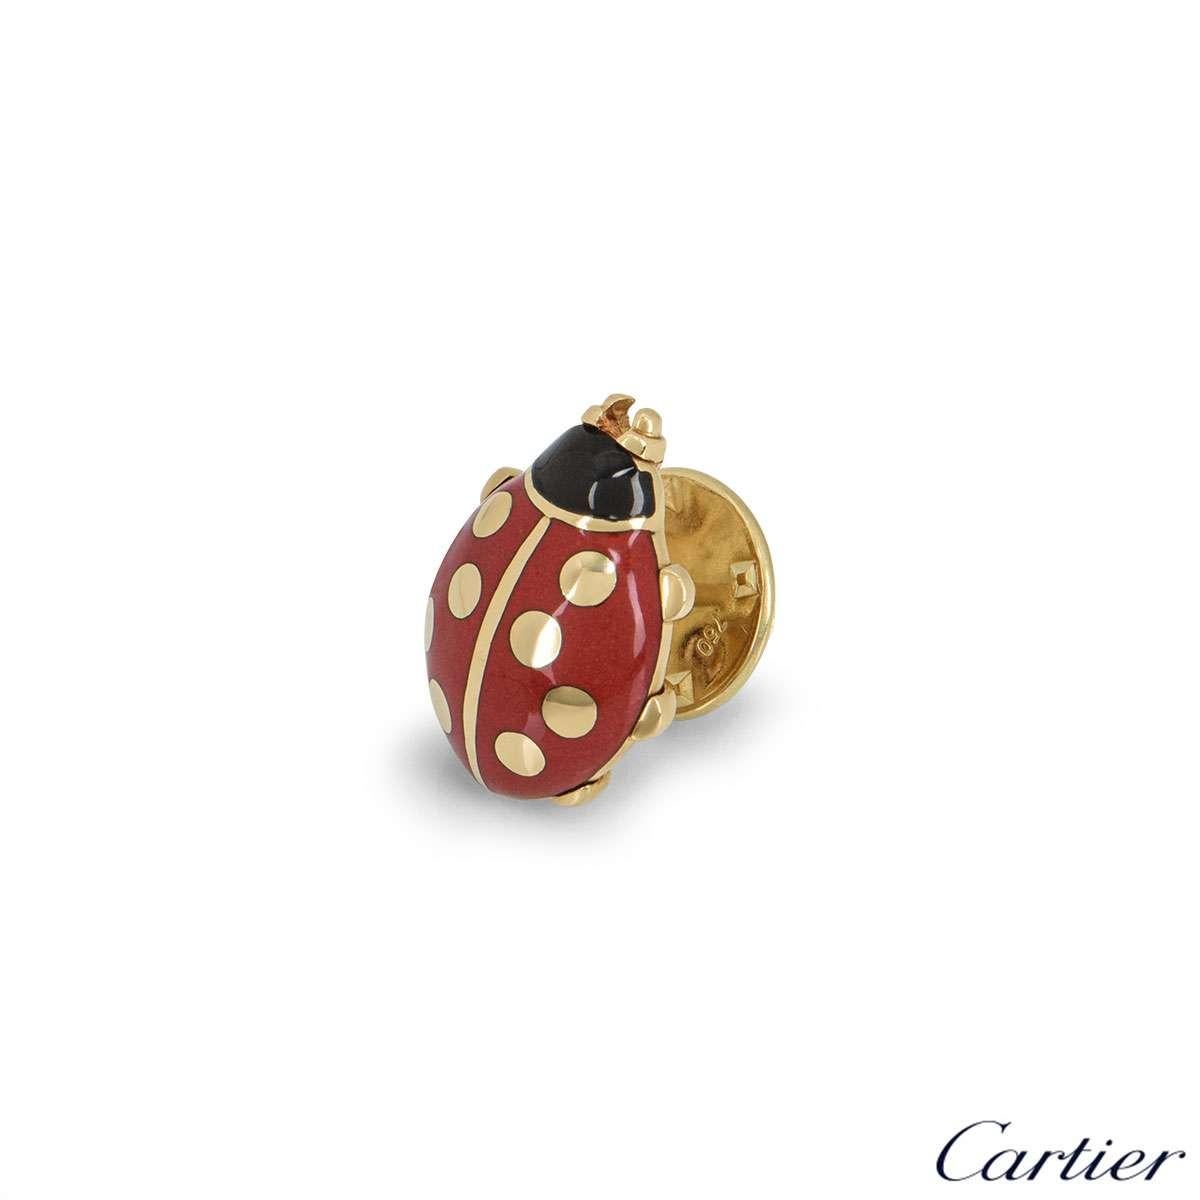 A unique 18k yellow gold Ladybird pin by Cartier. The Ladybird features red and black enamel with yellow gold spots. The pin measures approximately 1.5cm in length, has a clasp closure and has a gross weight of 4.6 grams.

The pin comes complete